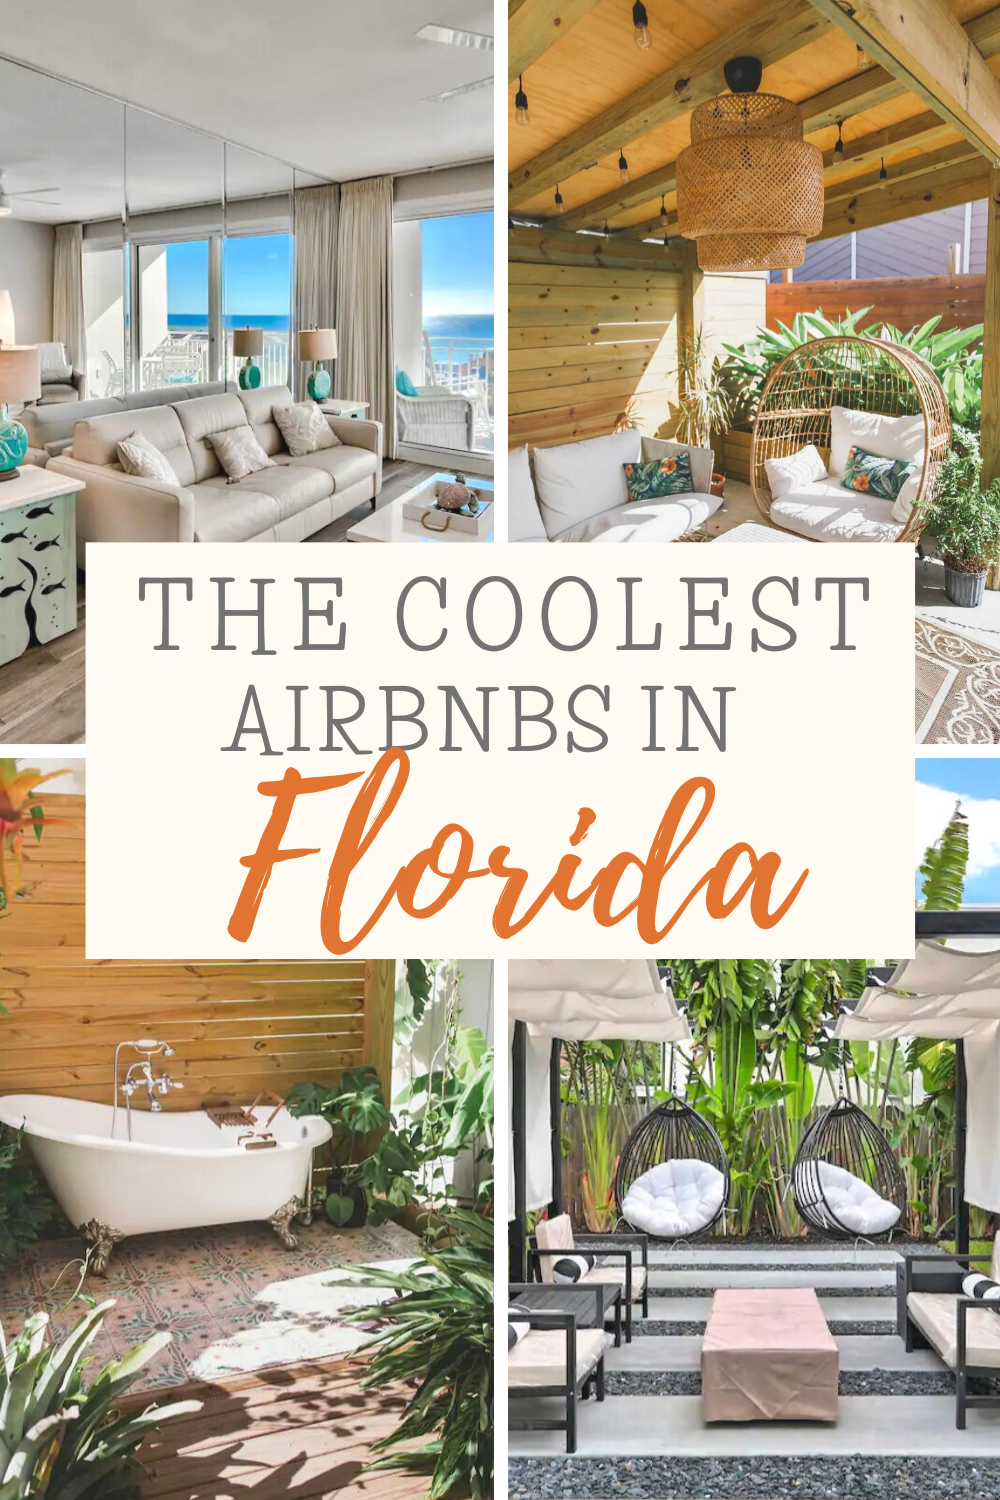 From quirky to strange and all-around awesome, here are some of the coolest Airbnbs in Florida